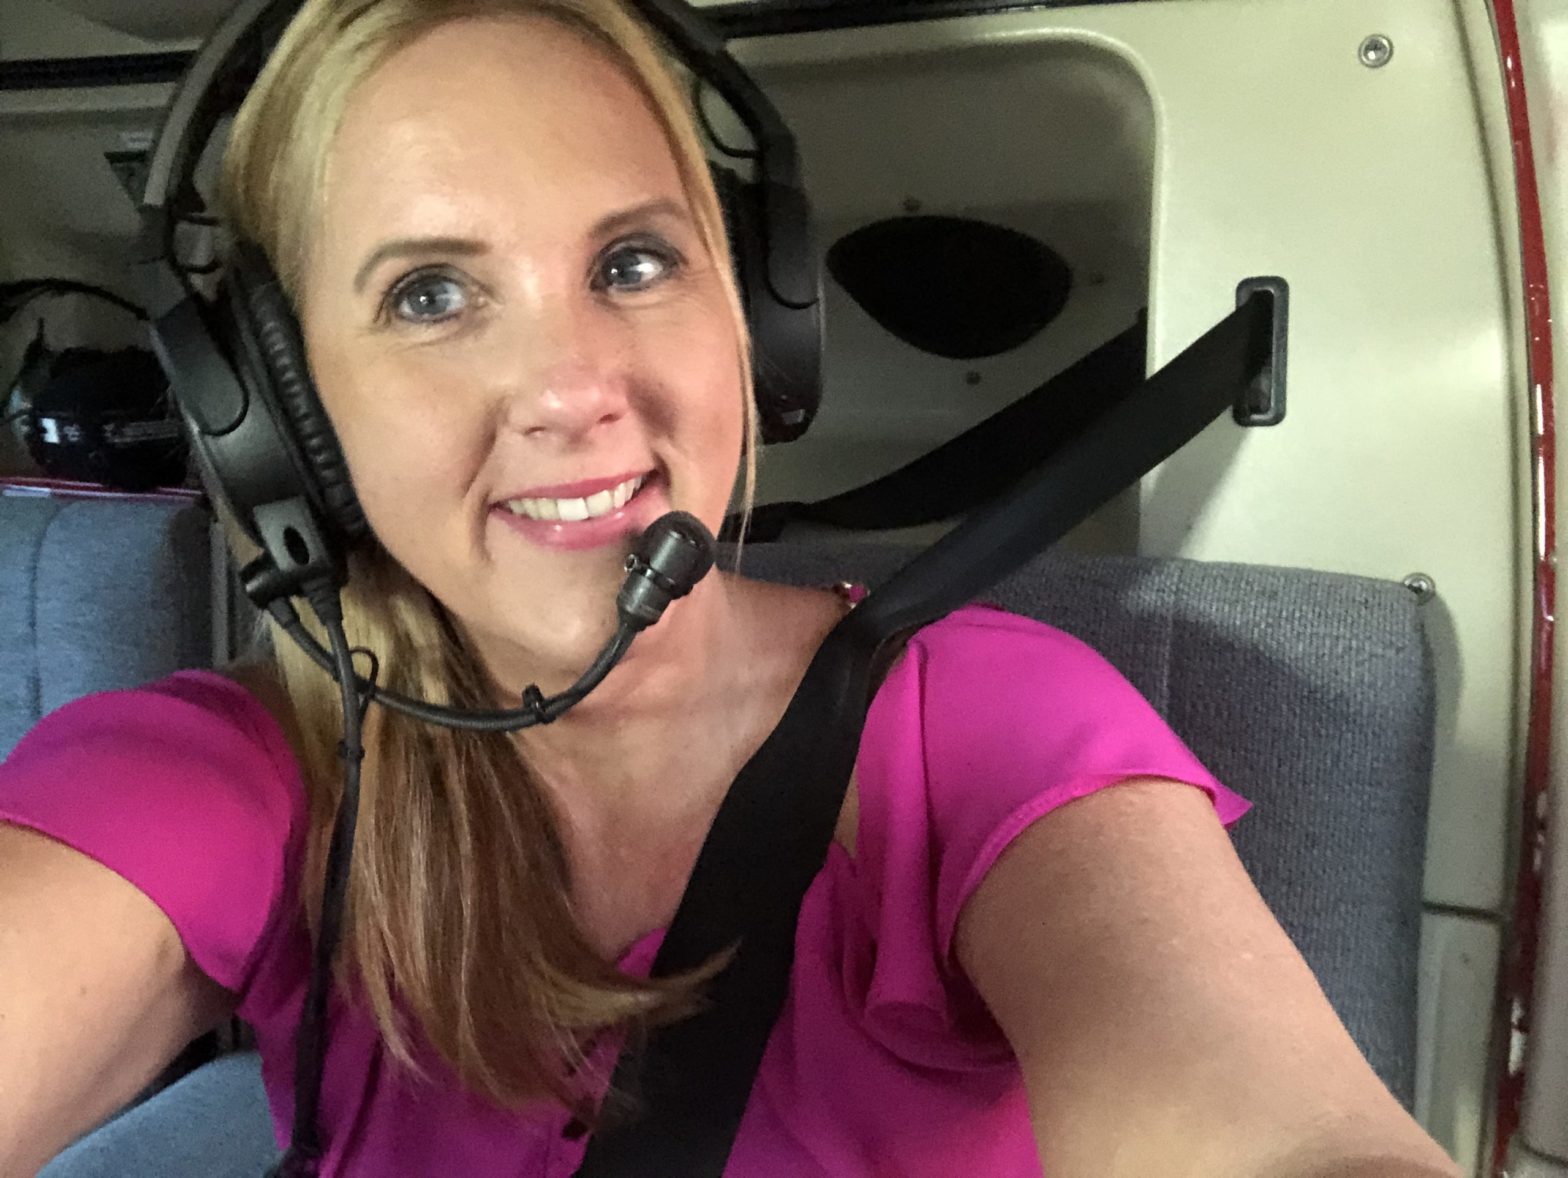 An all female flight News crew is taking aviation to new heights.